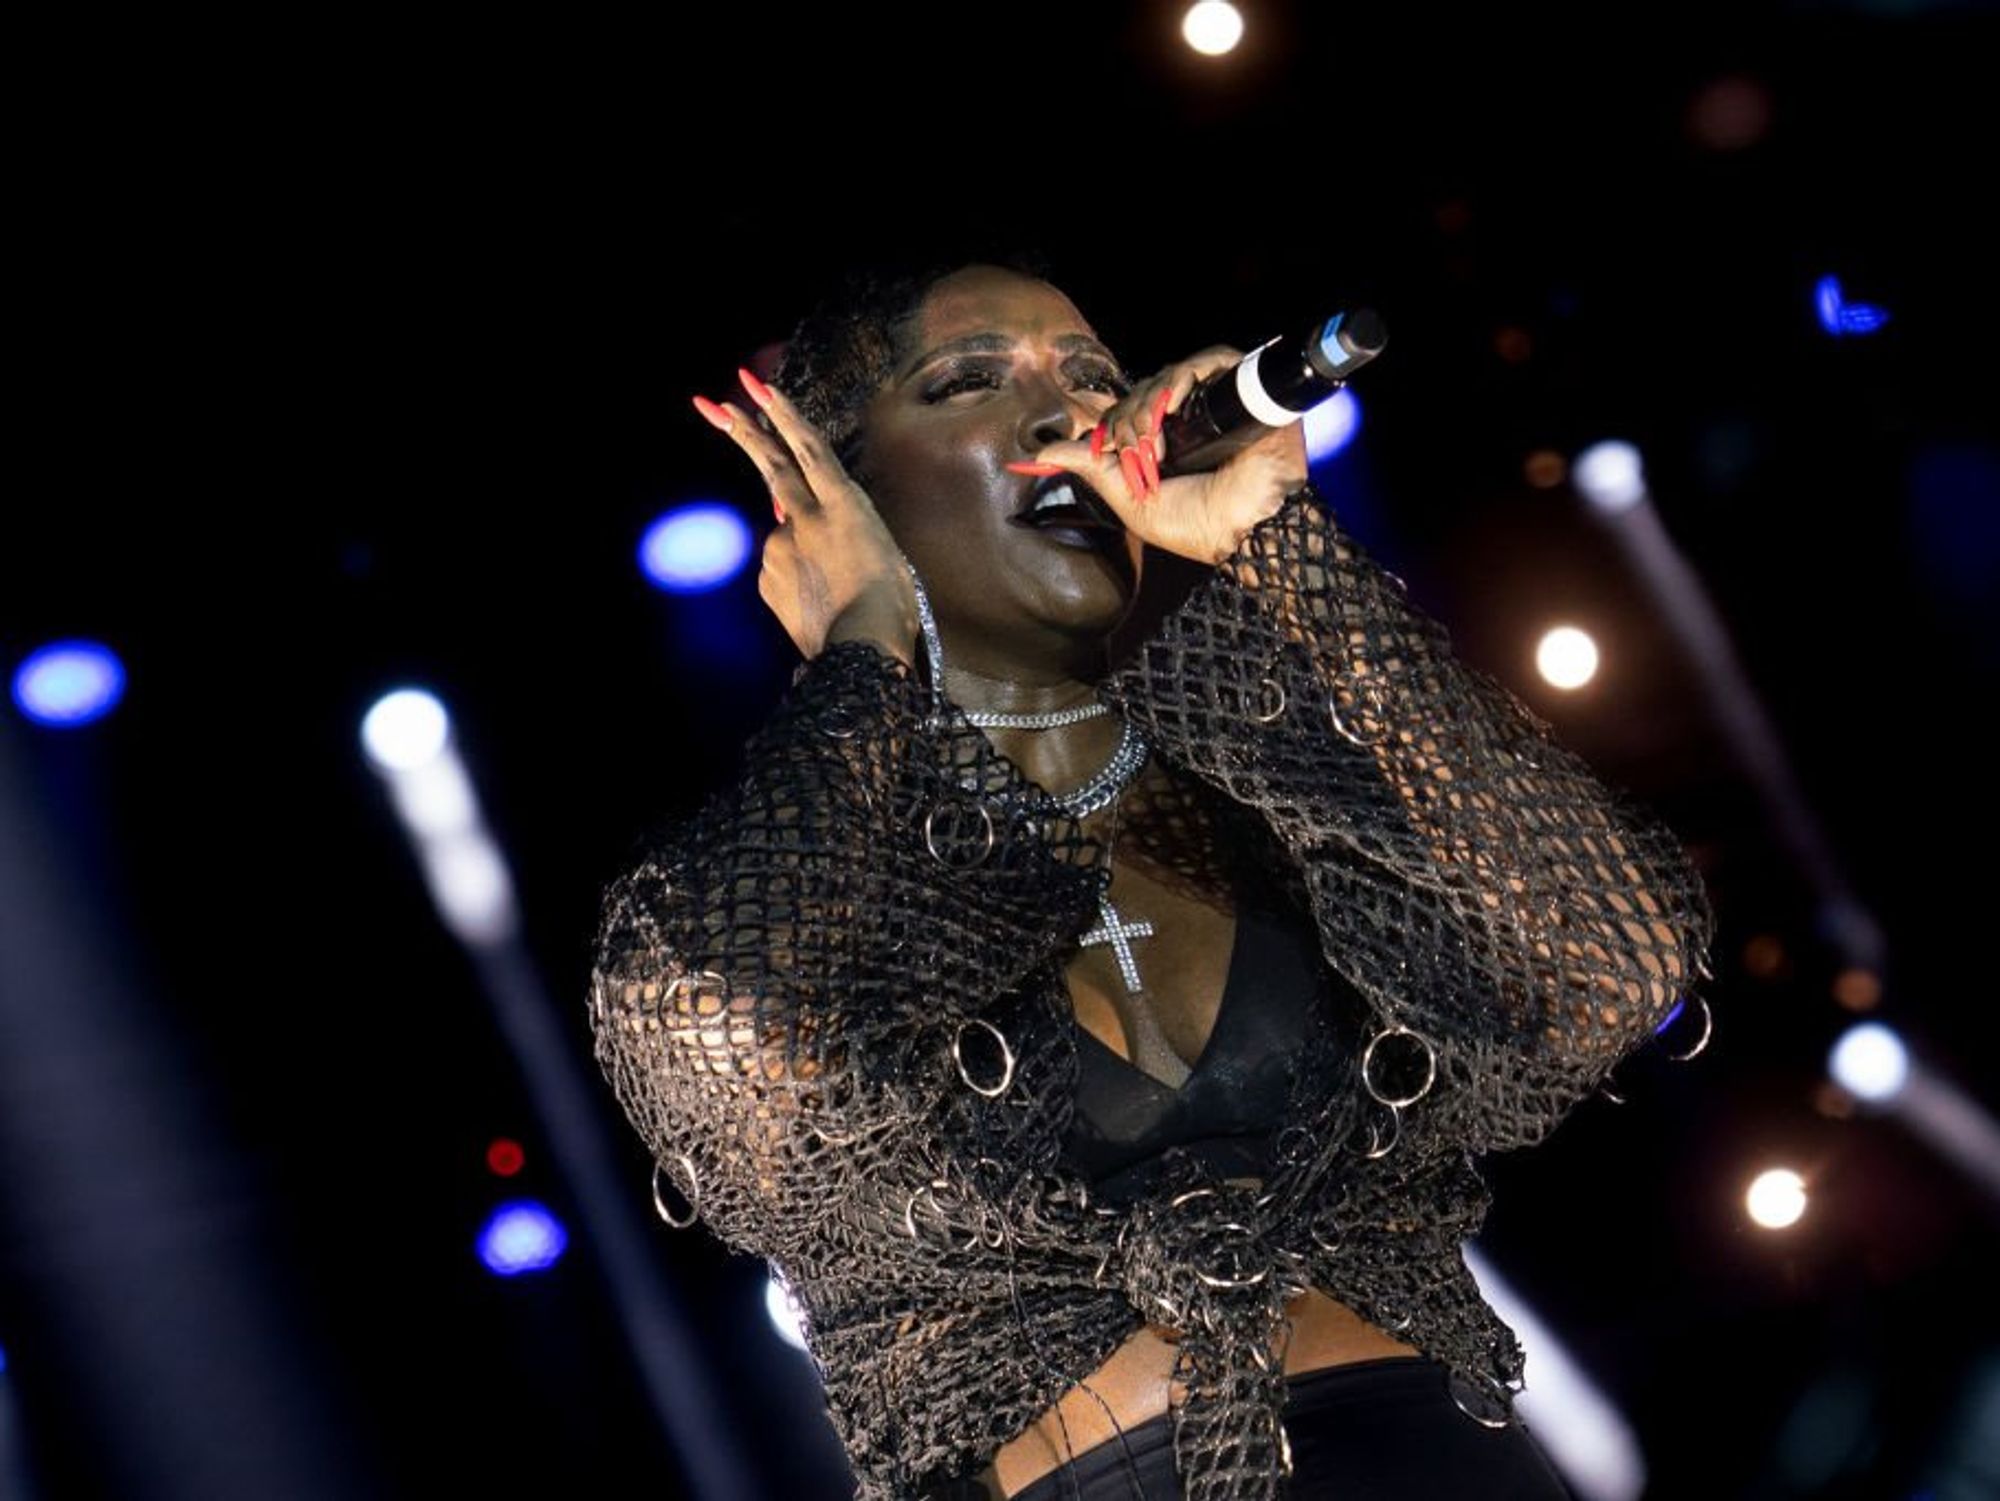 Tiwa Savage performs during the Afro Nation Ghana Music Festival in December 2022.